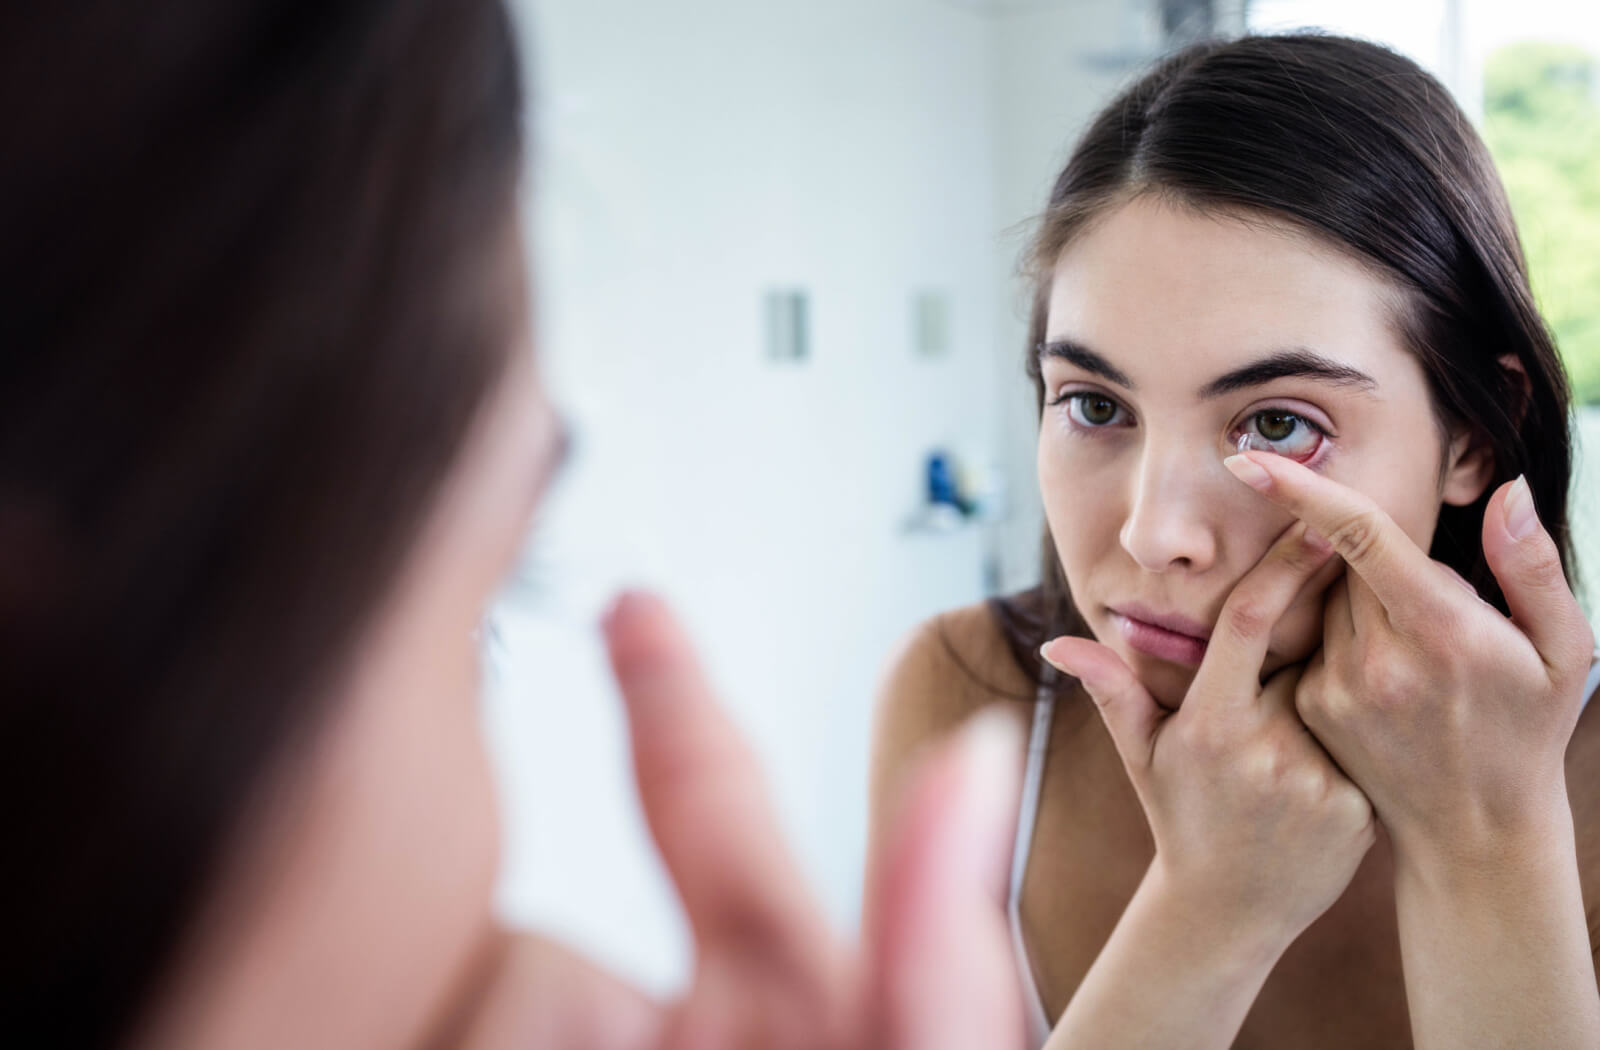 A youthful woman with dry eyes is inserting her contact lens while looking into a mirror.